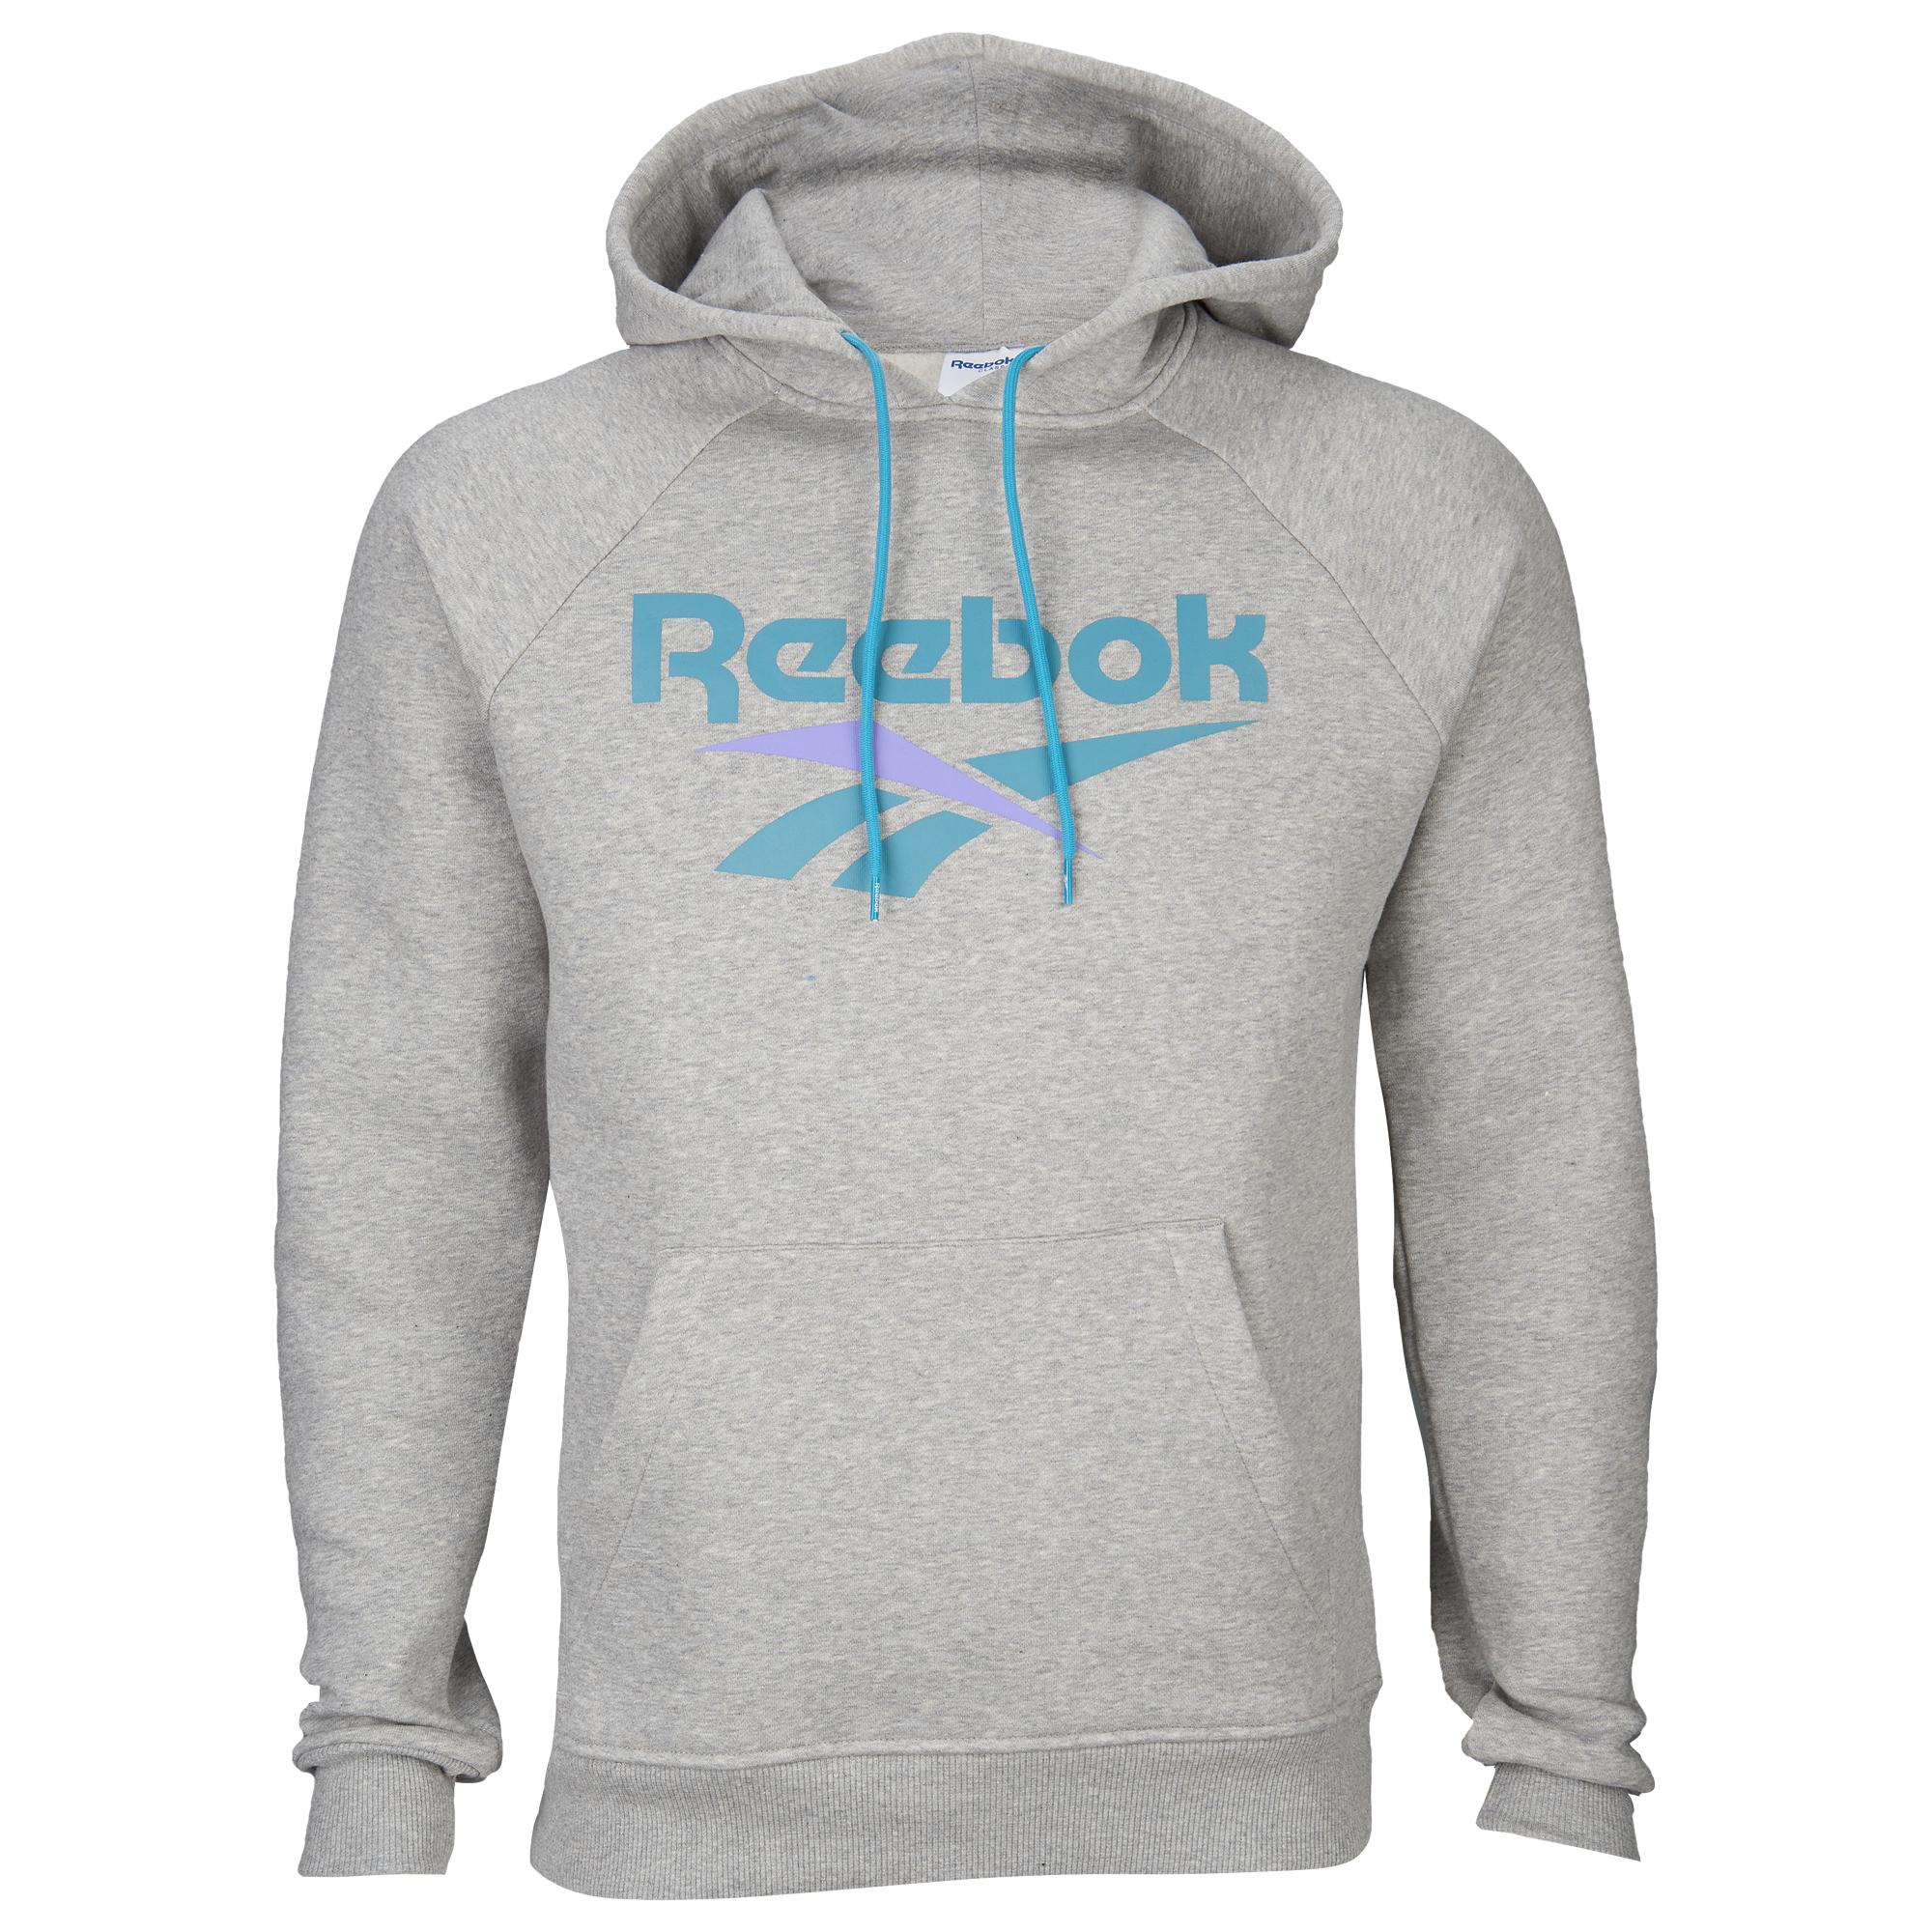 Reebok Logo Pullover Hoodie in Gray for Men - Save 17% - Lyst